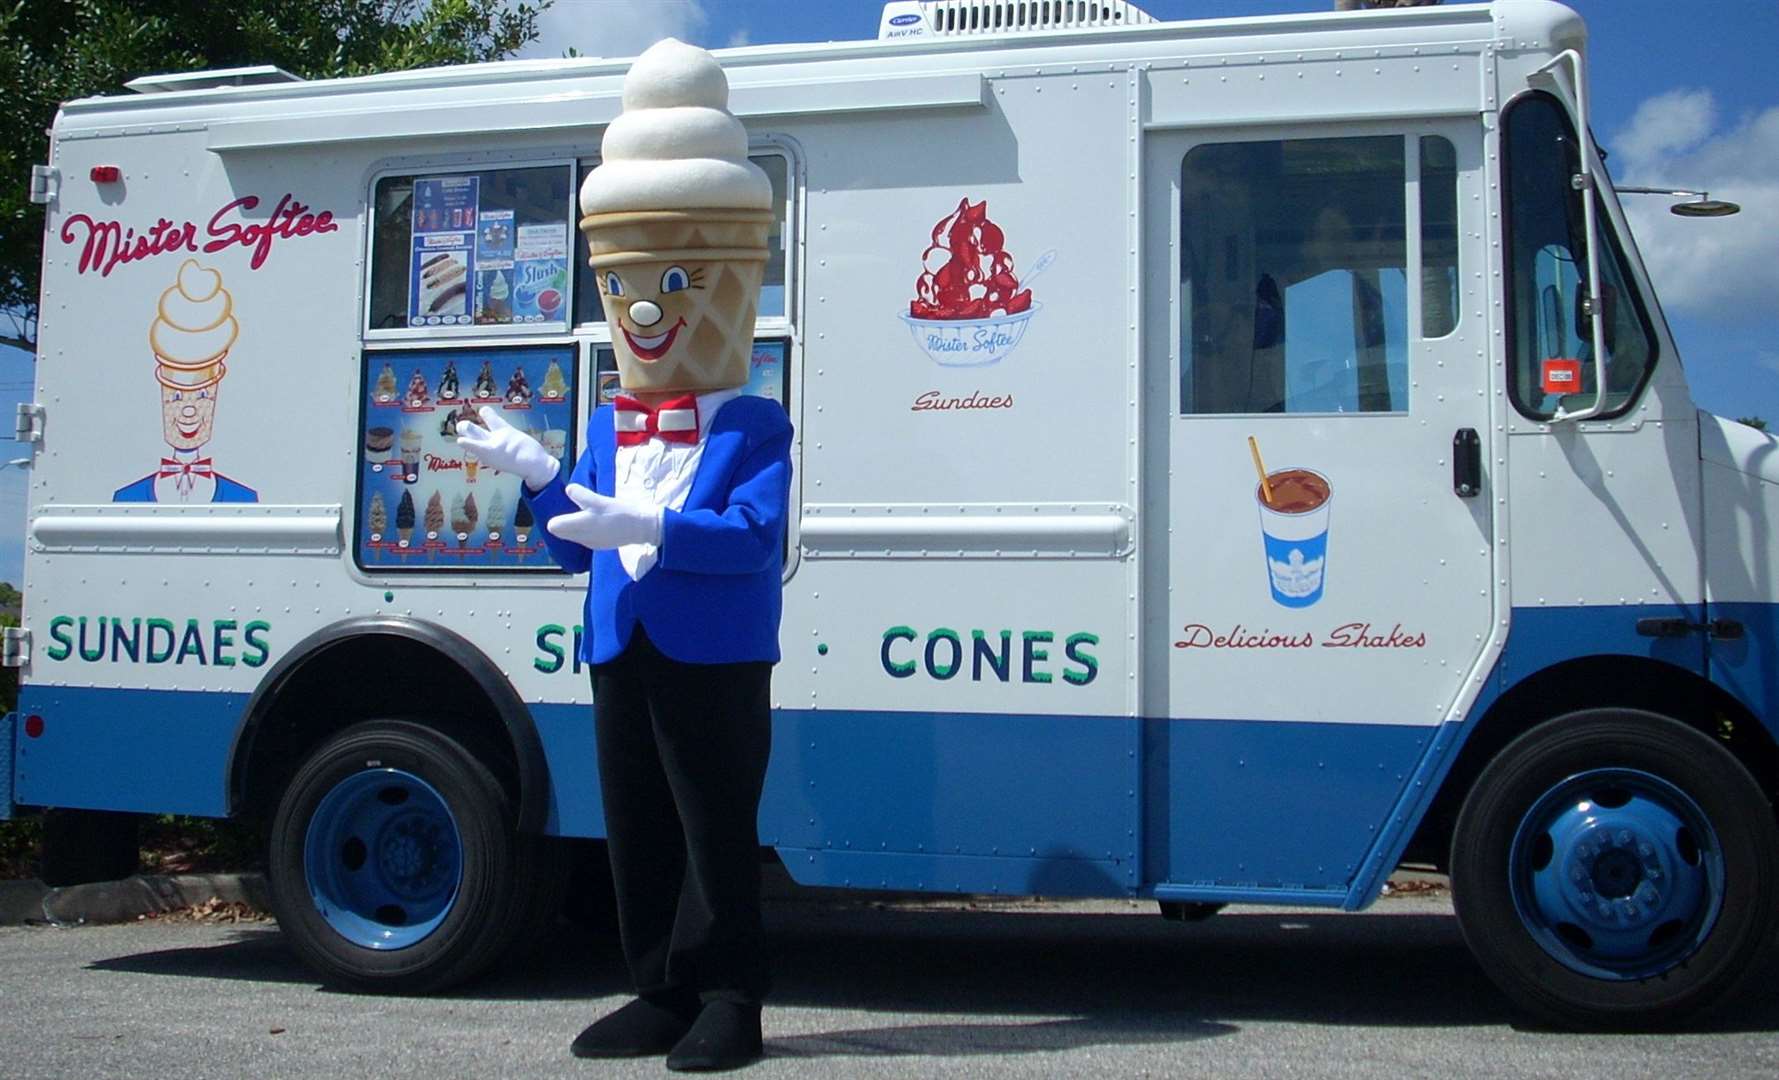 Peter Rodberg had the two first Mr Softee franchises in the country. Picture: Wikimedia Commons